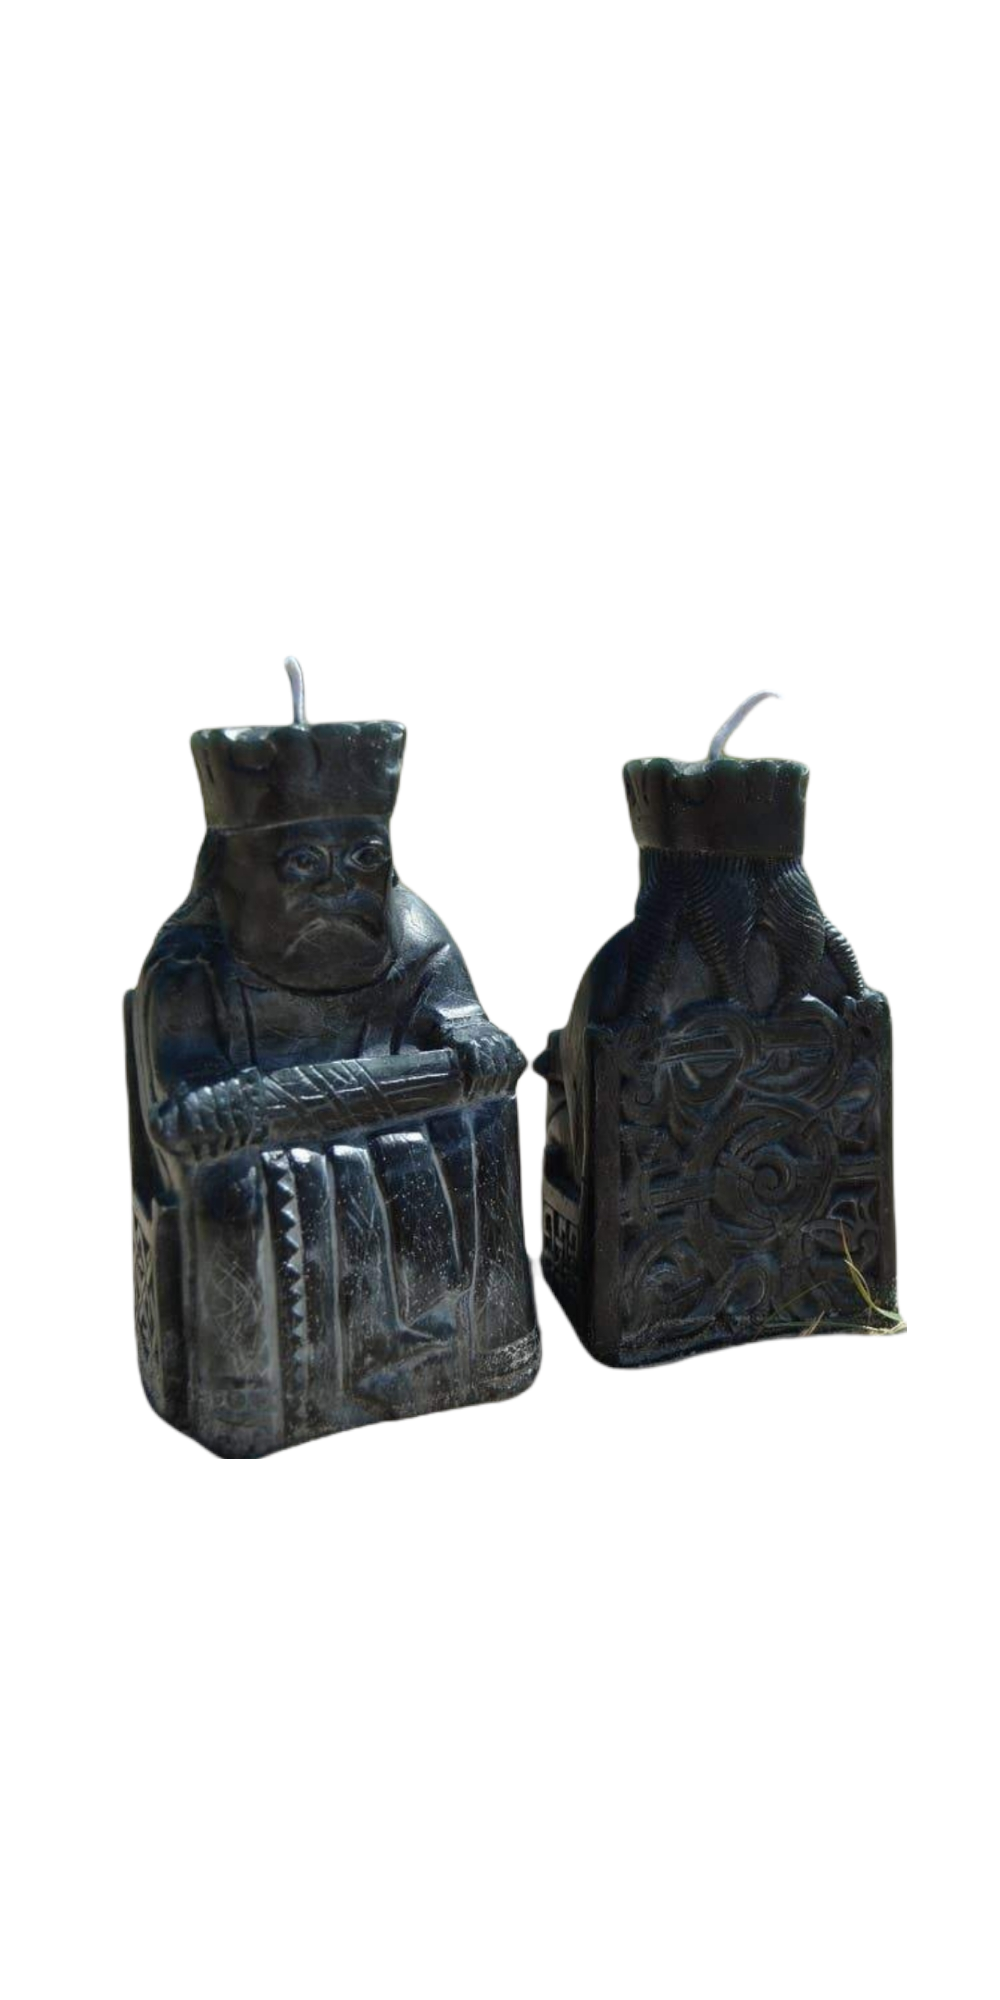 Lewis Chess Men Candle - King